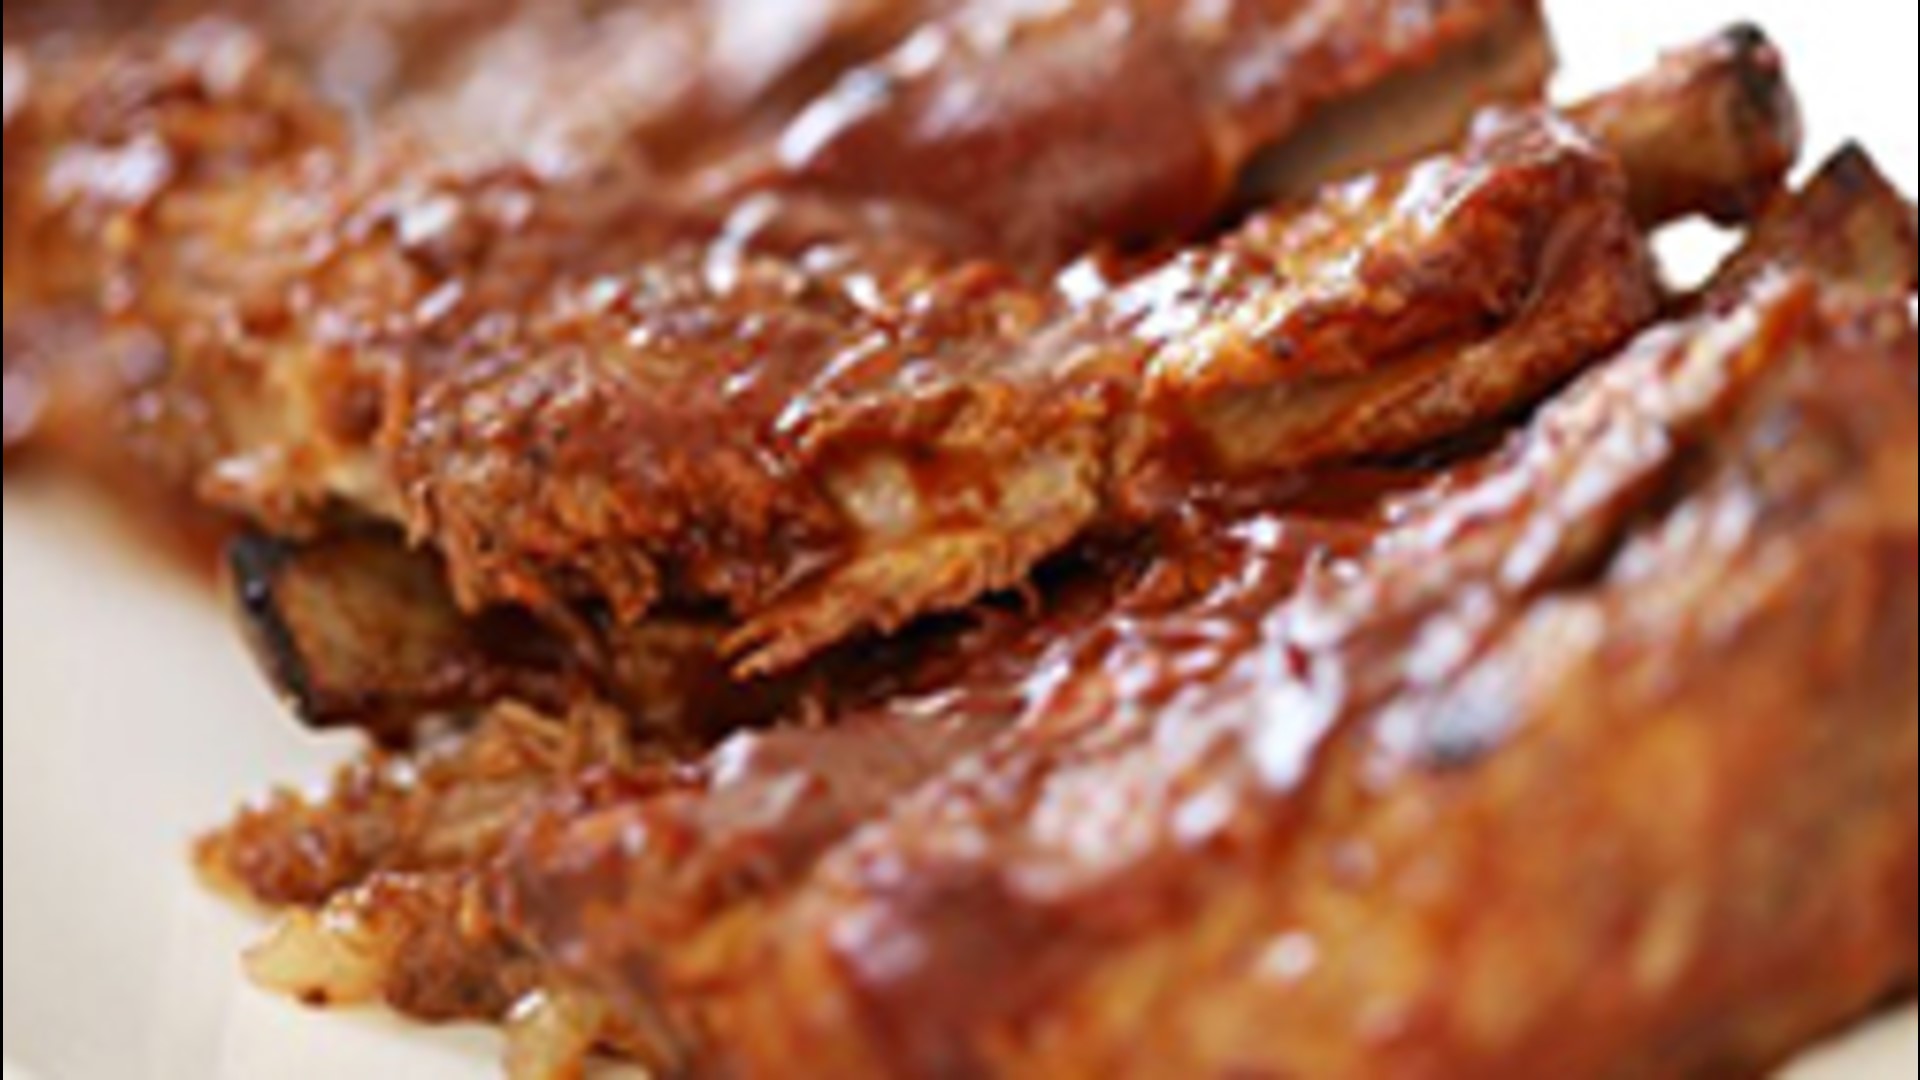 These mouth watering BBQ baby back ribs are packed with flavor and literally falling off the bone tender. You HAVE to try this recipe...it's sure to be a huge hit!


